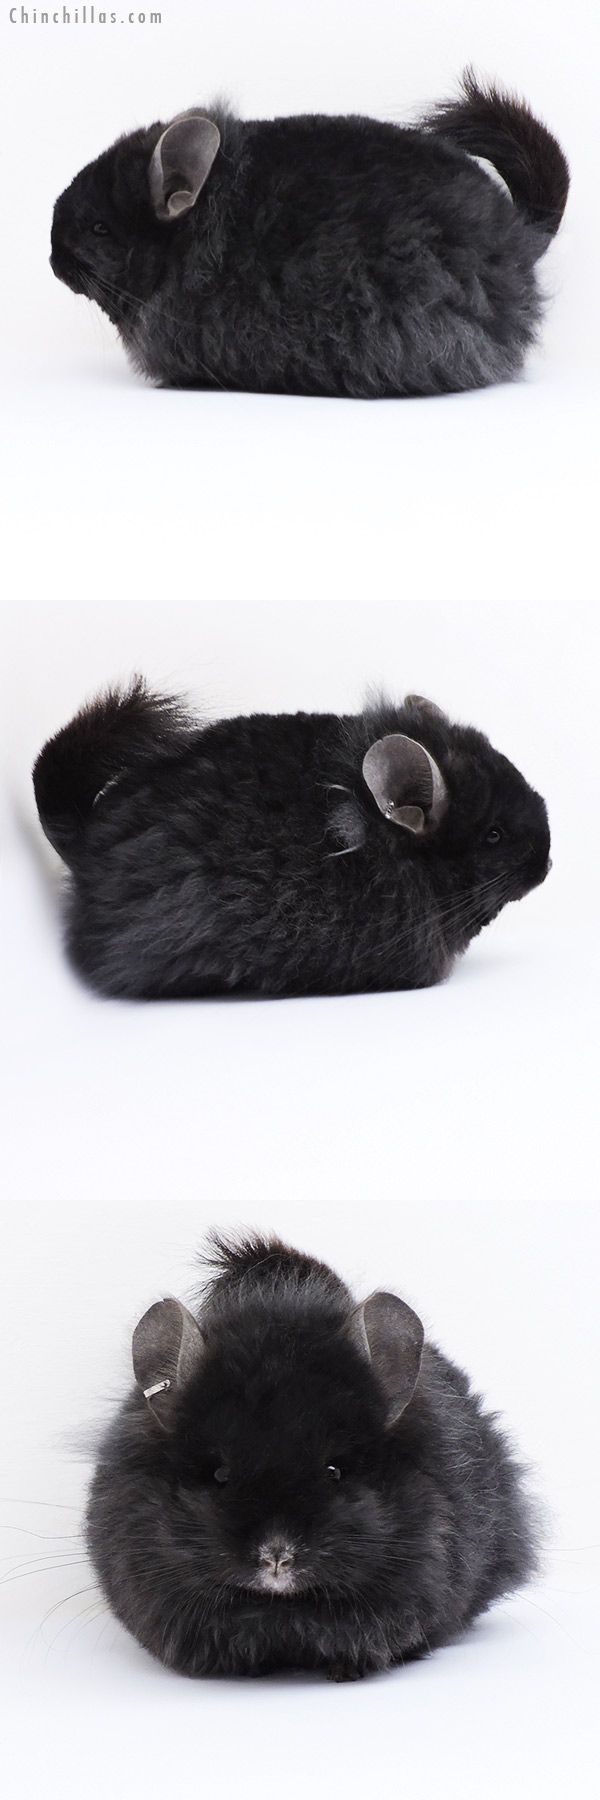 Chinchilla or related item offered for sale or export on Chinchillas.com - 18082 Exceptional Ebony G2  Royal Imperial Angora Male Chinchilla with Lion Mane